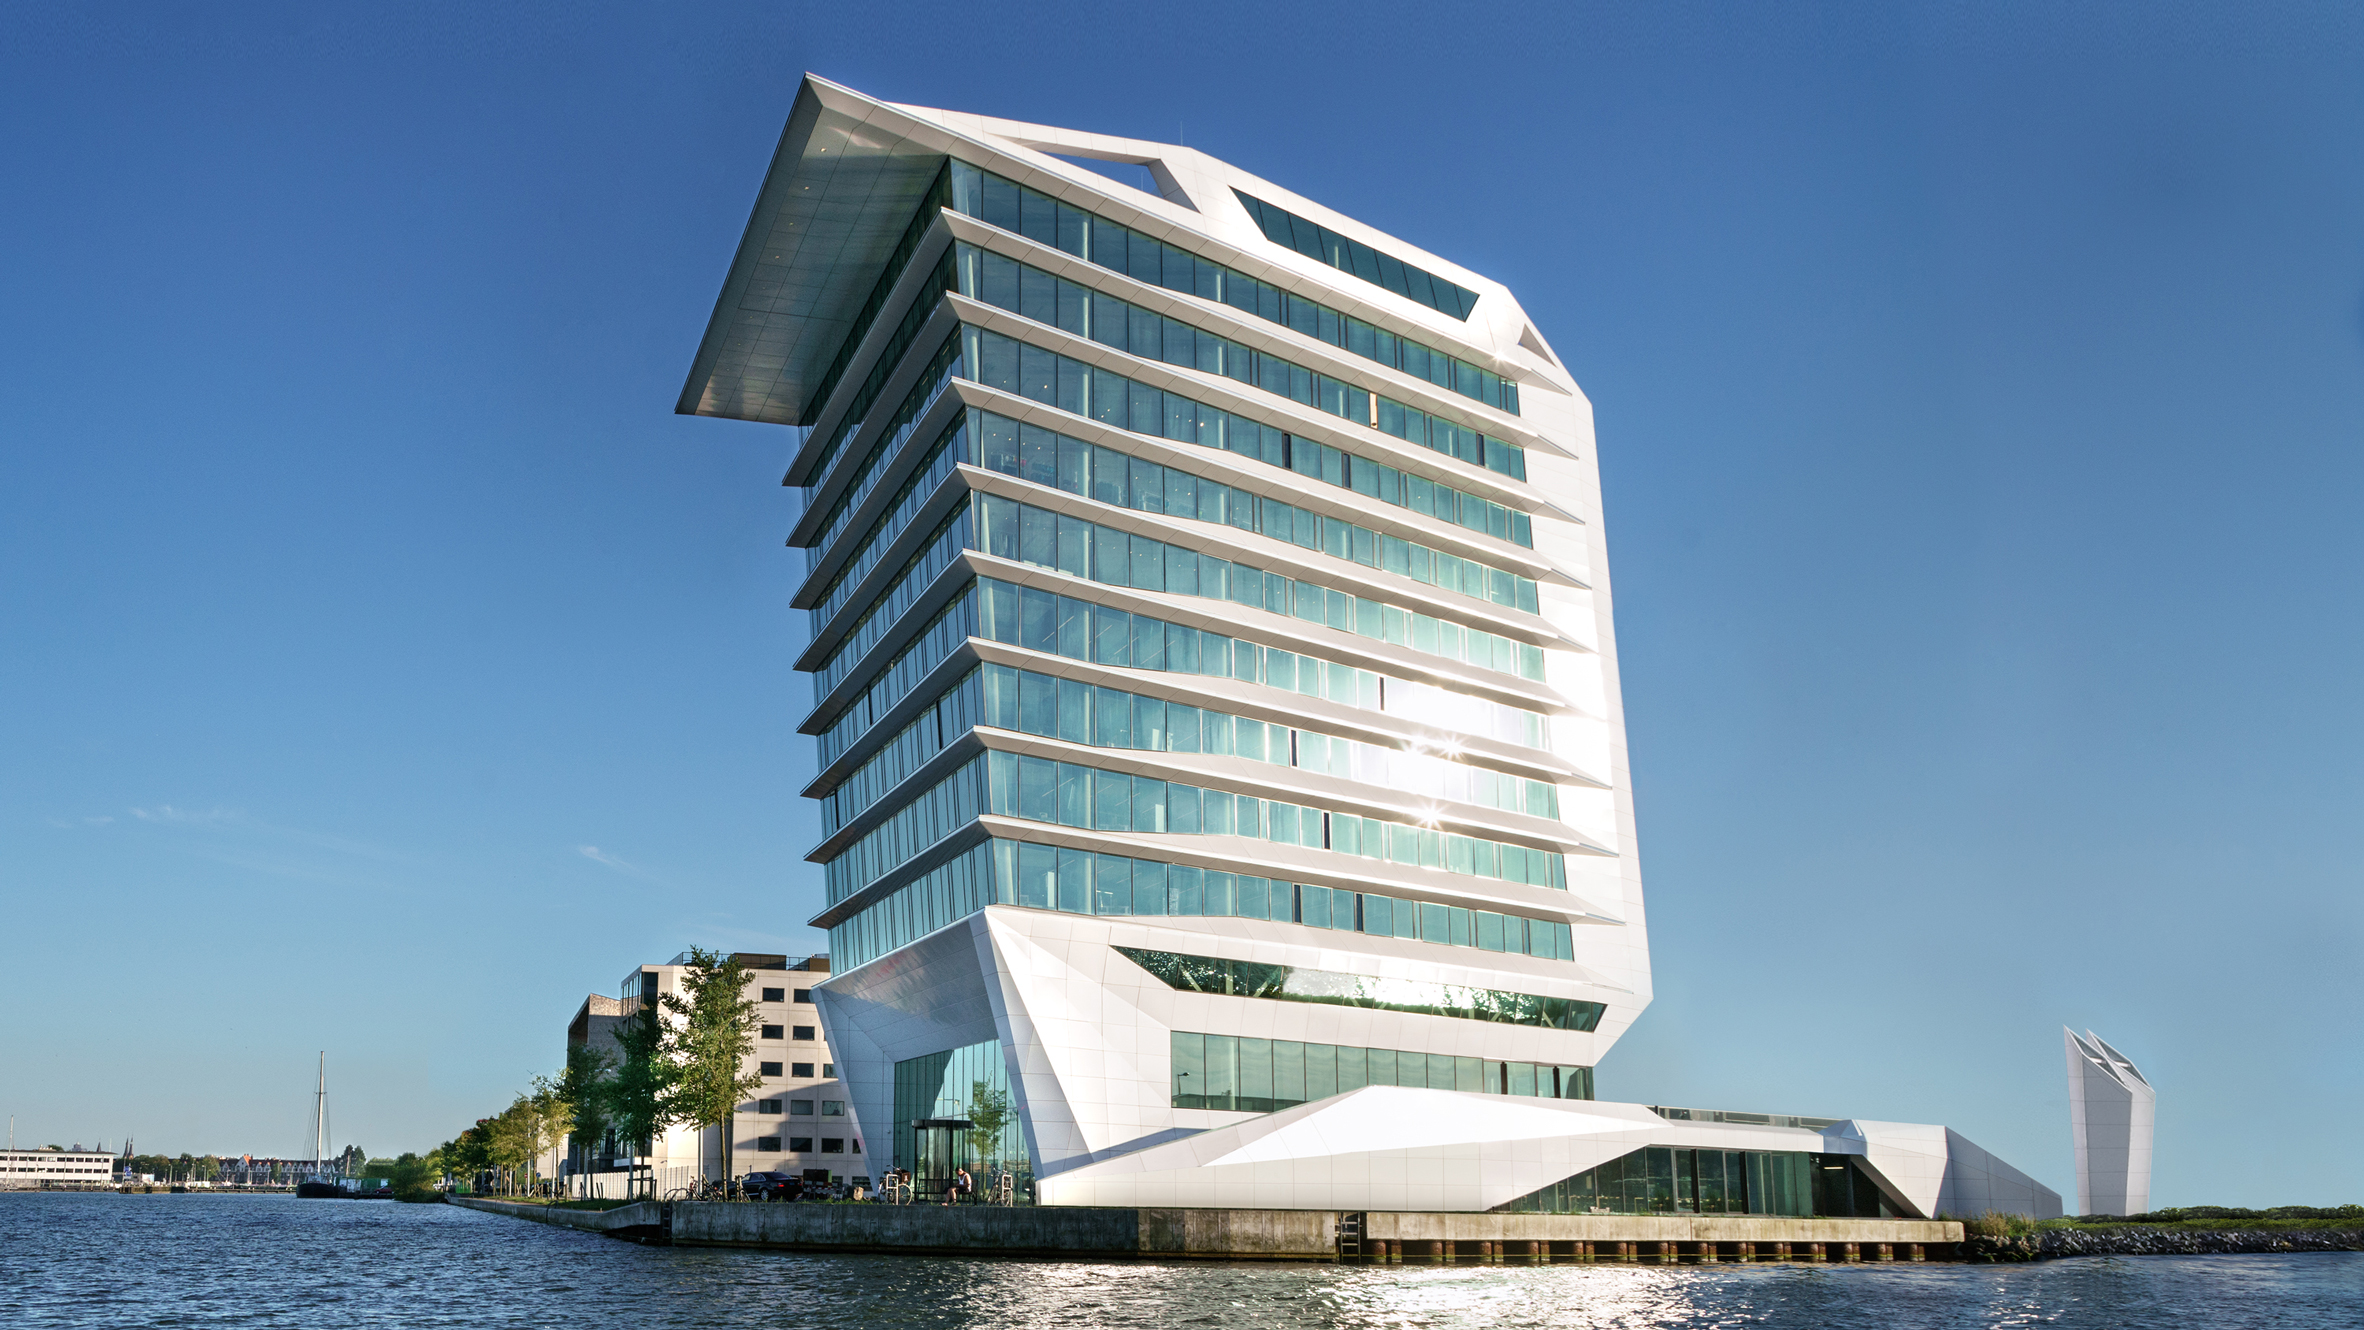 Ship-like headquarters for Klein and Tommy overlooks IJ